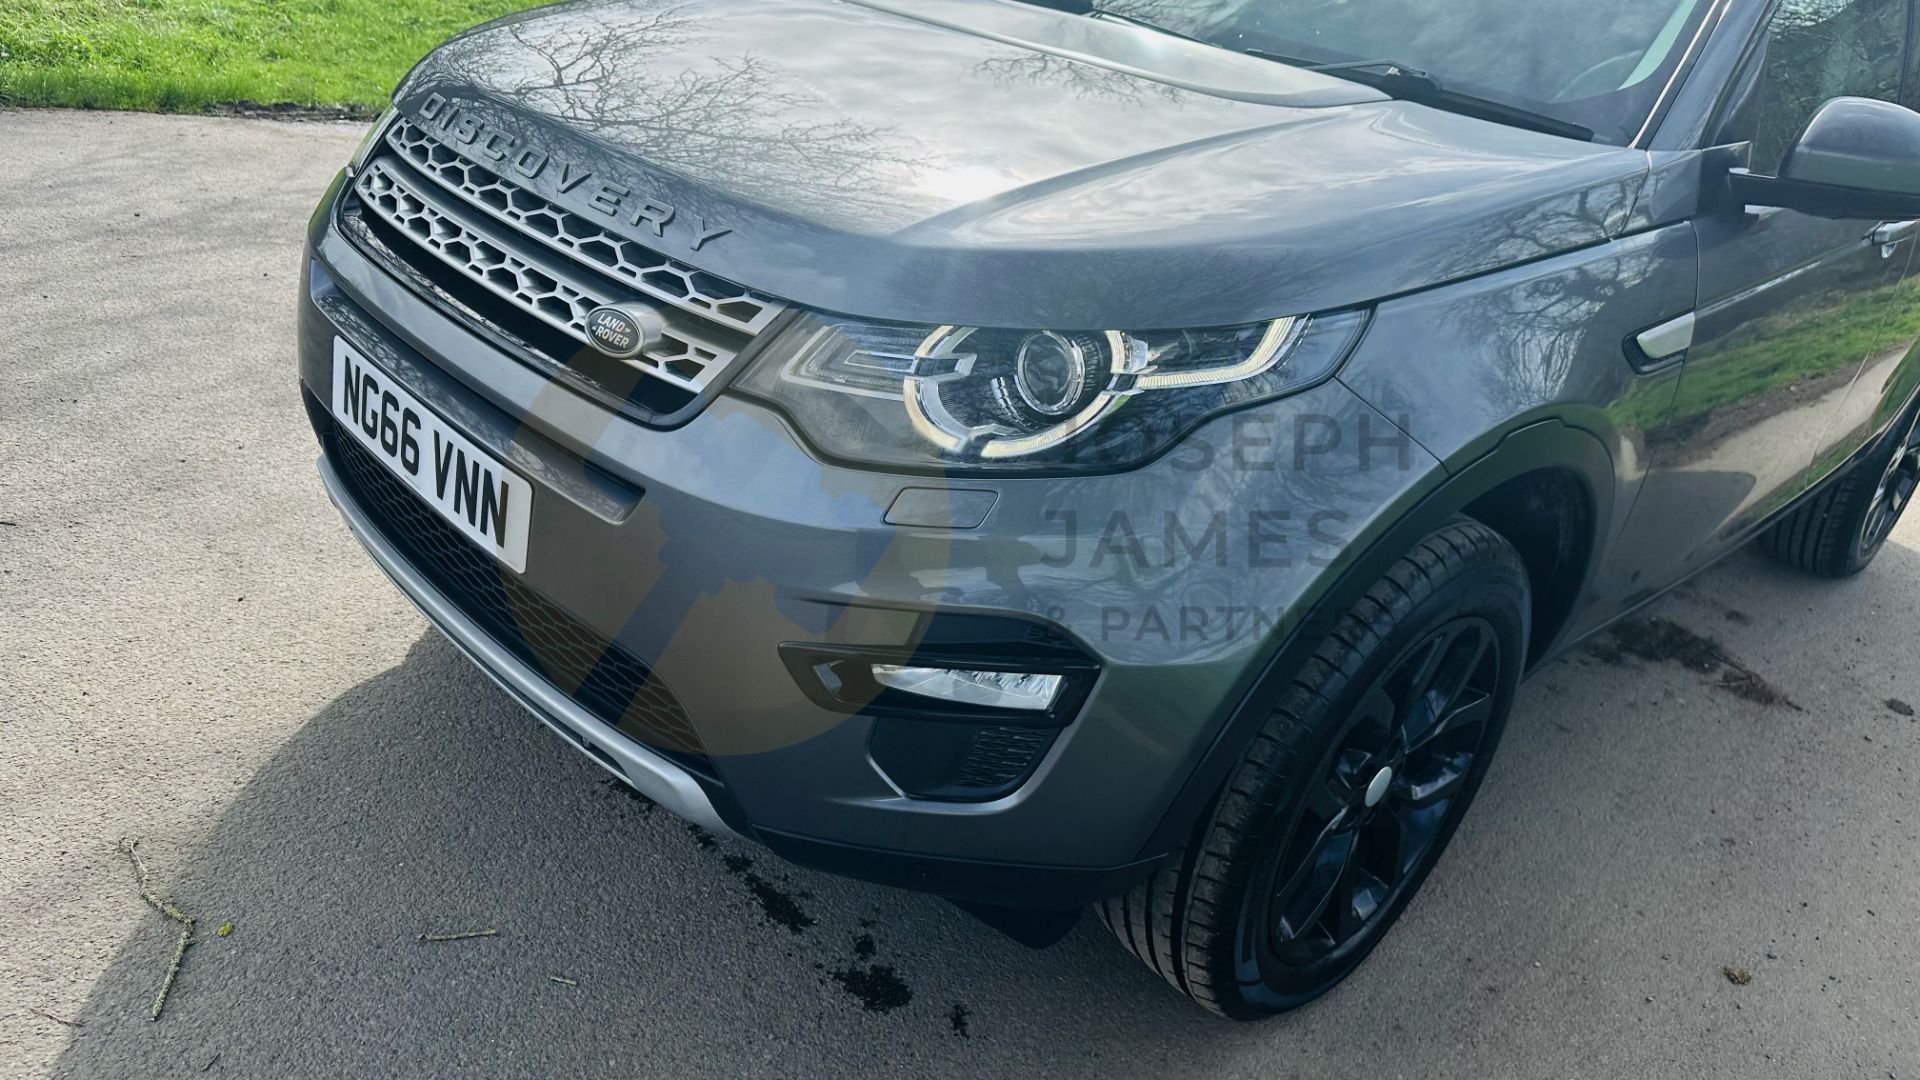 (On Sale) LAND ROVER DISCOVERY SPORT *HSE EDITION* 7 SEATER SUV (2017 - EURO 6) 2.0 TD4 - AUTOMATIC - Image 16 of 48